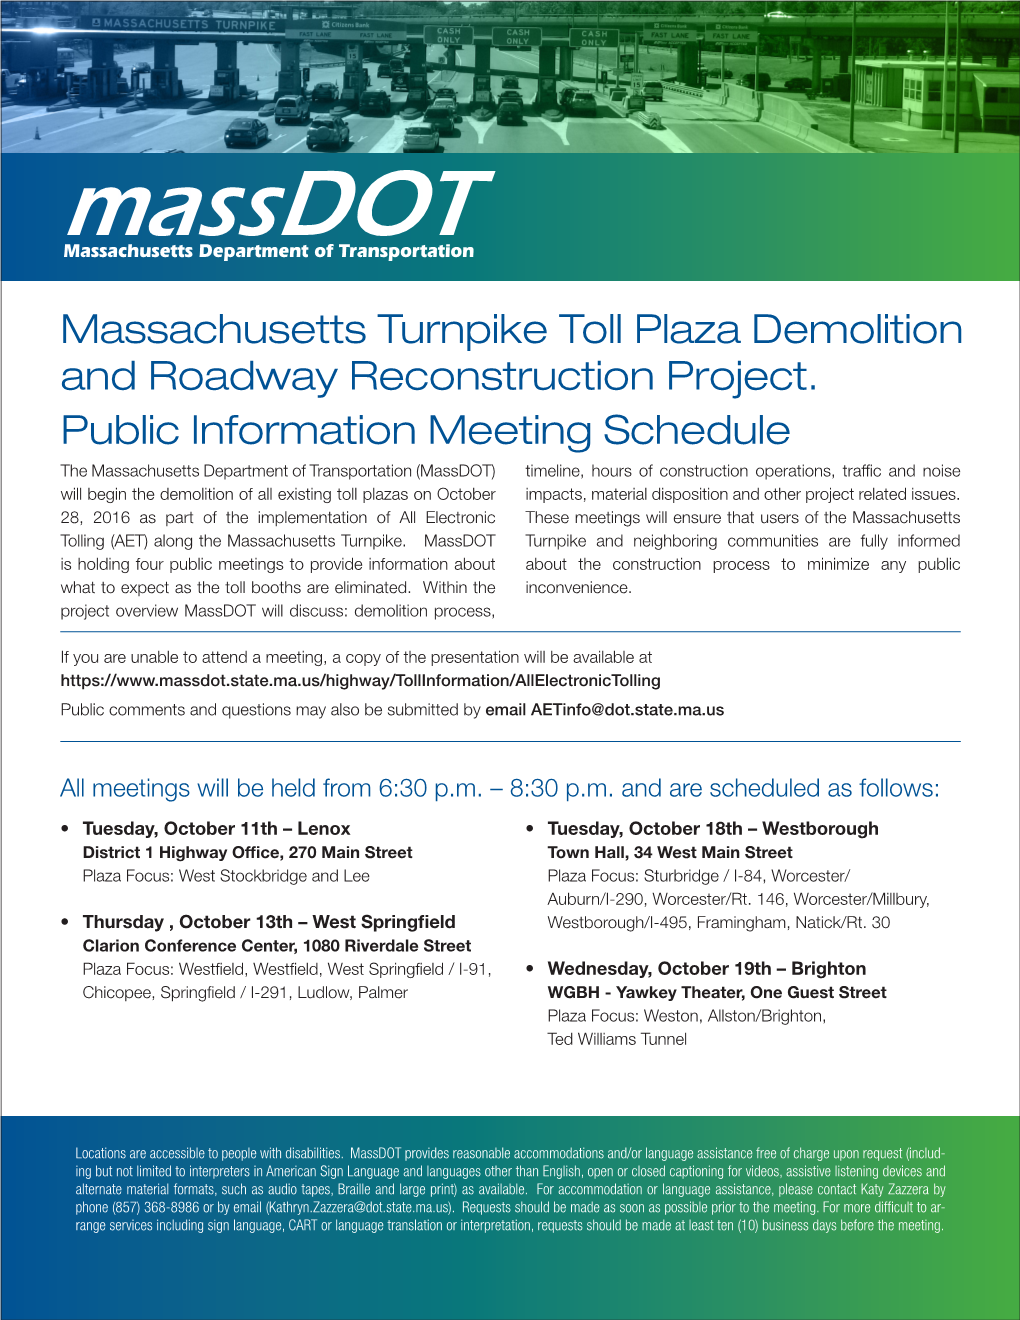 Massachusetts Turnpike Toll Plaza Demolition and Roadway Reconstruction Project. Public Information Meeting Schedule